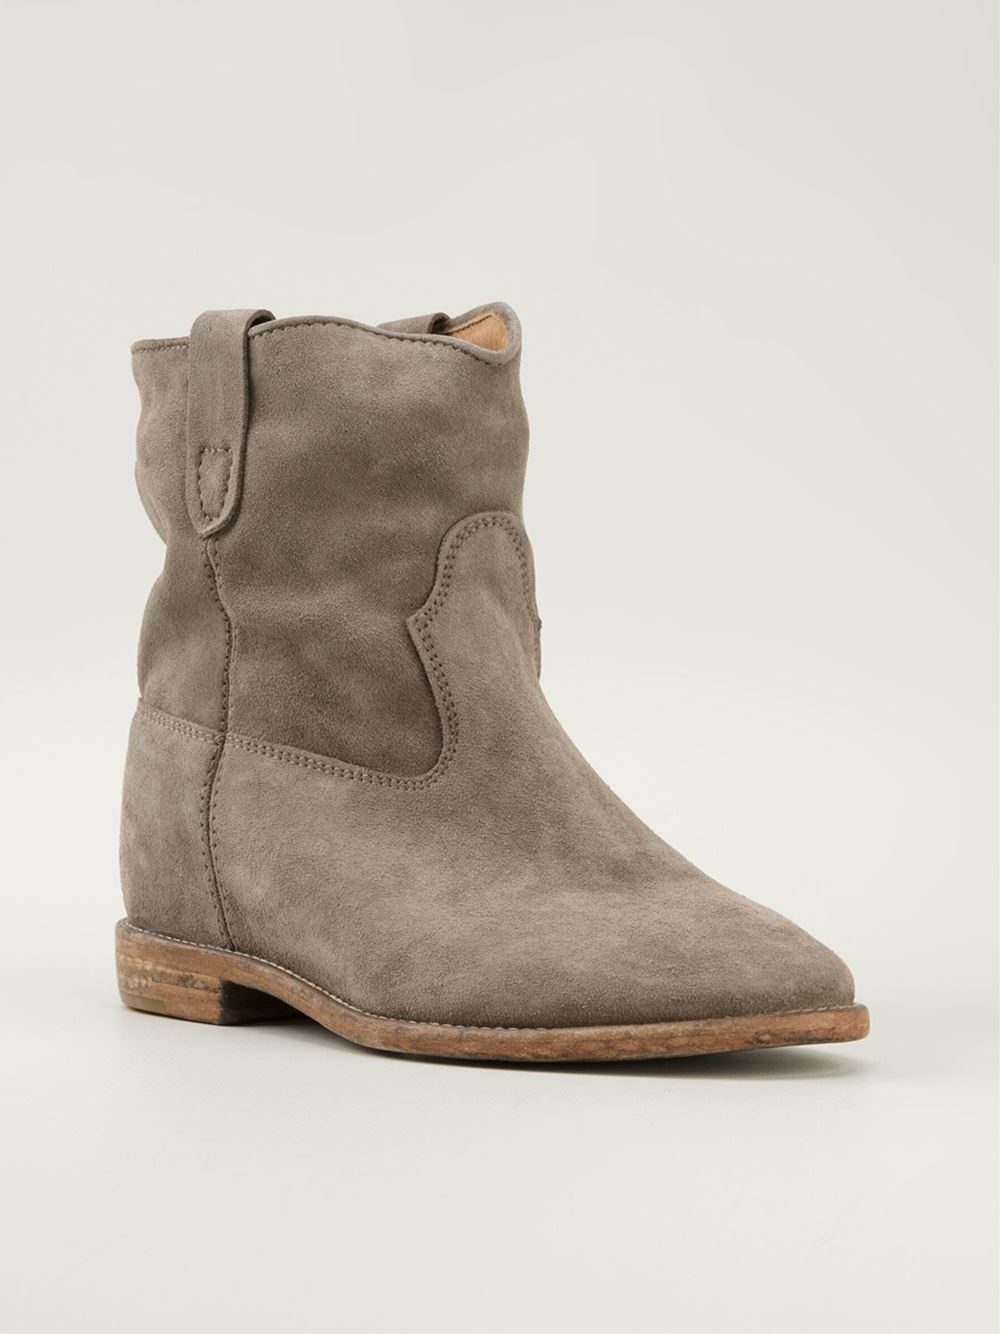 Isabel Marant 'Crisi' Boots in Grey 